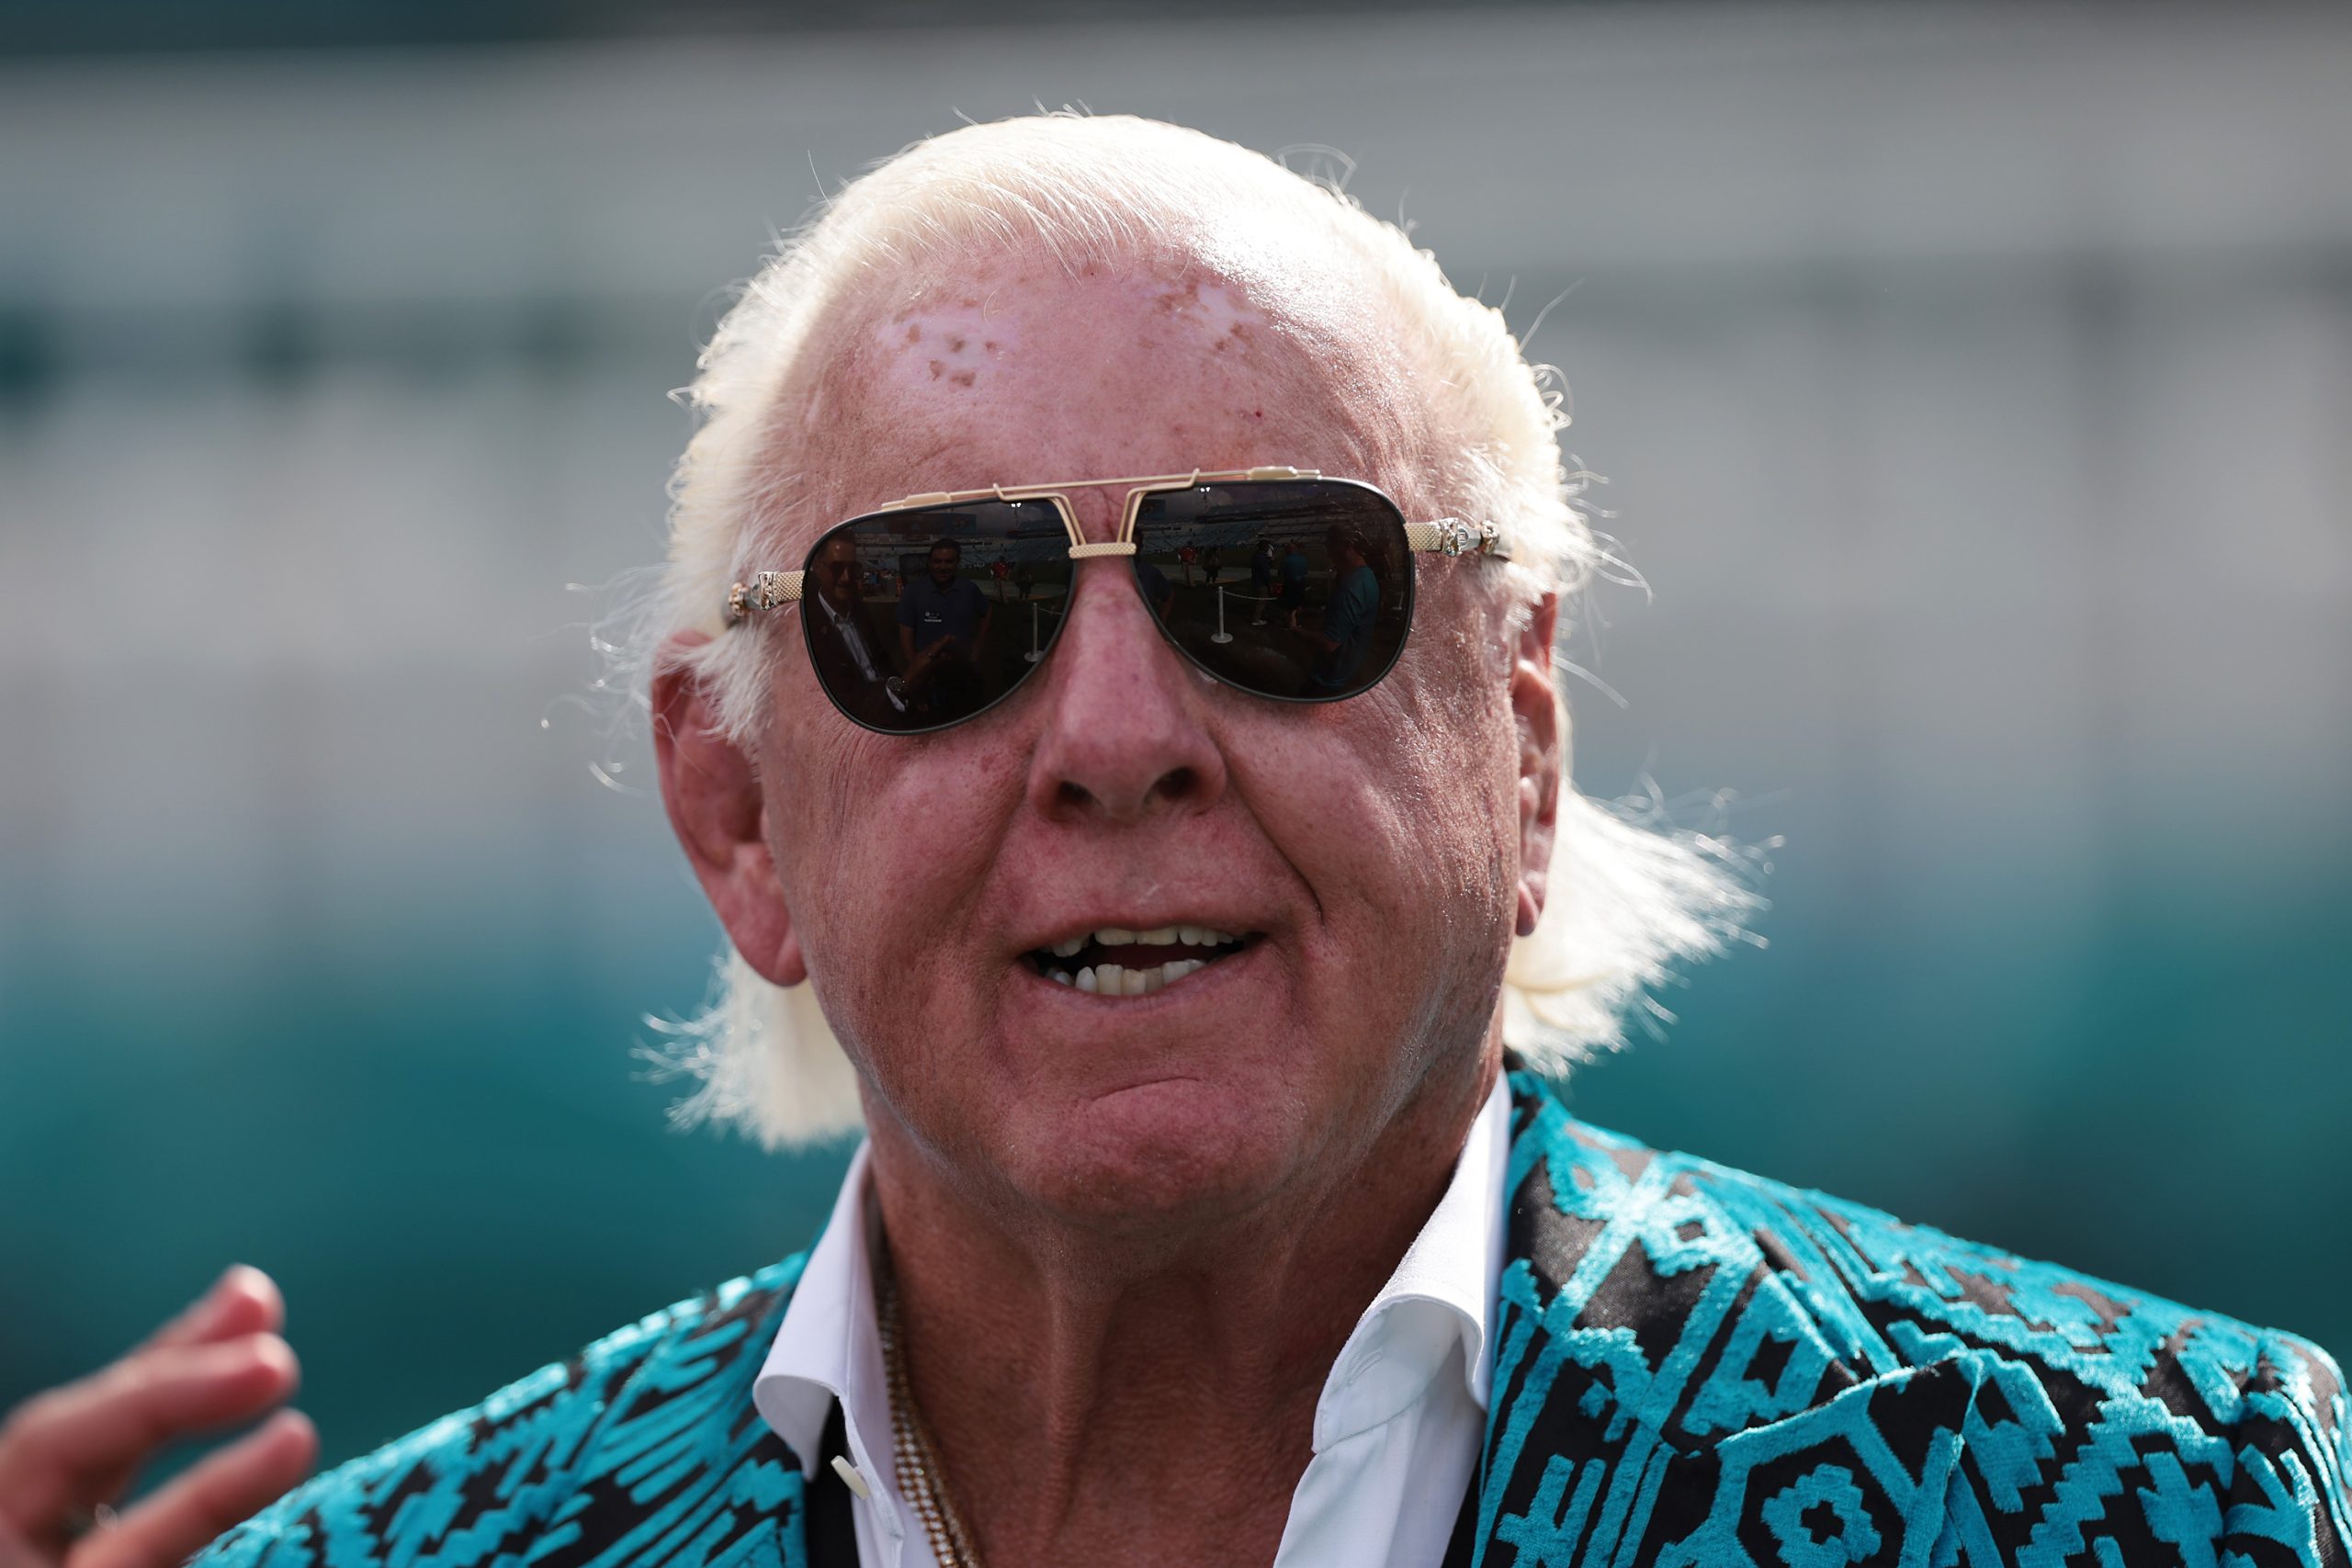 Former professional wrestler Ric Flair on the field before the game between the Jacksonville Jaguars and Houston Texans.